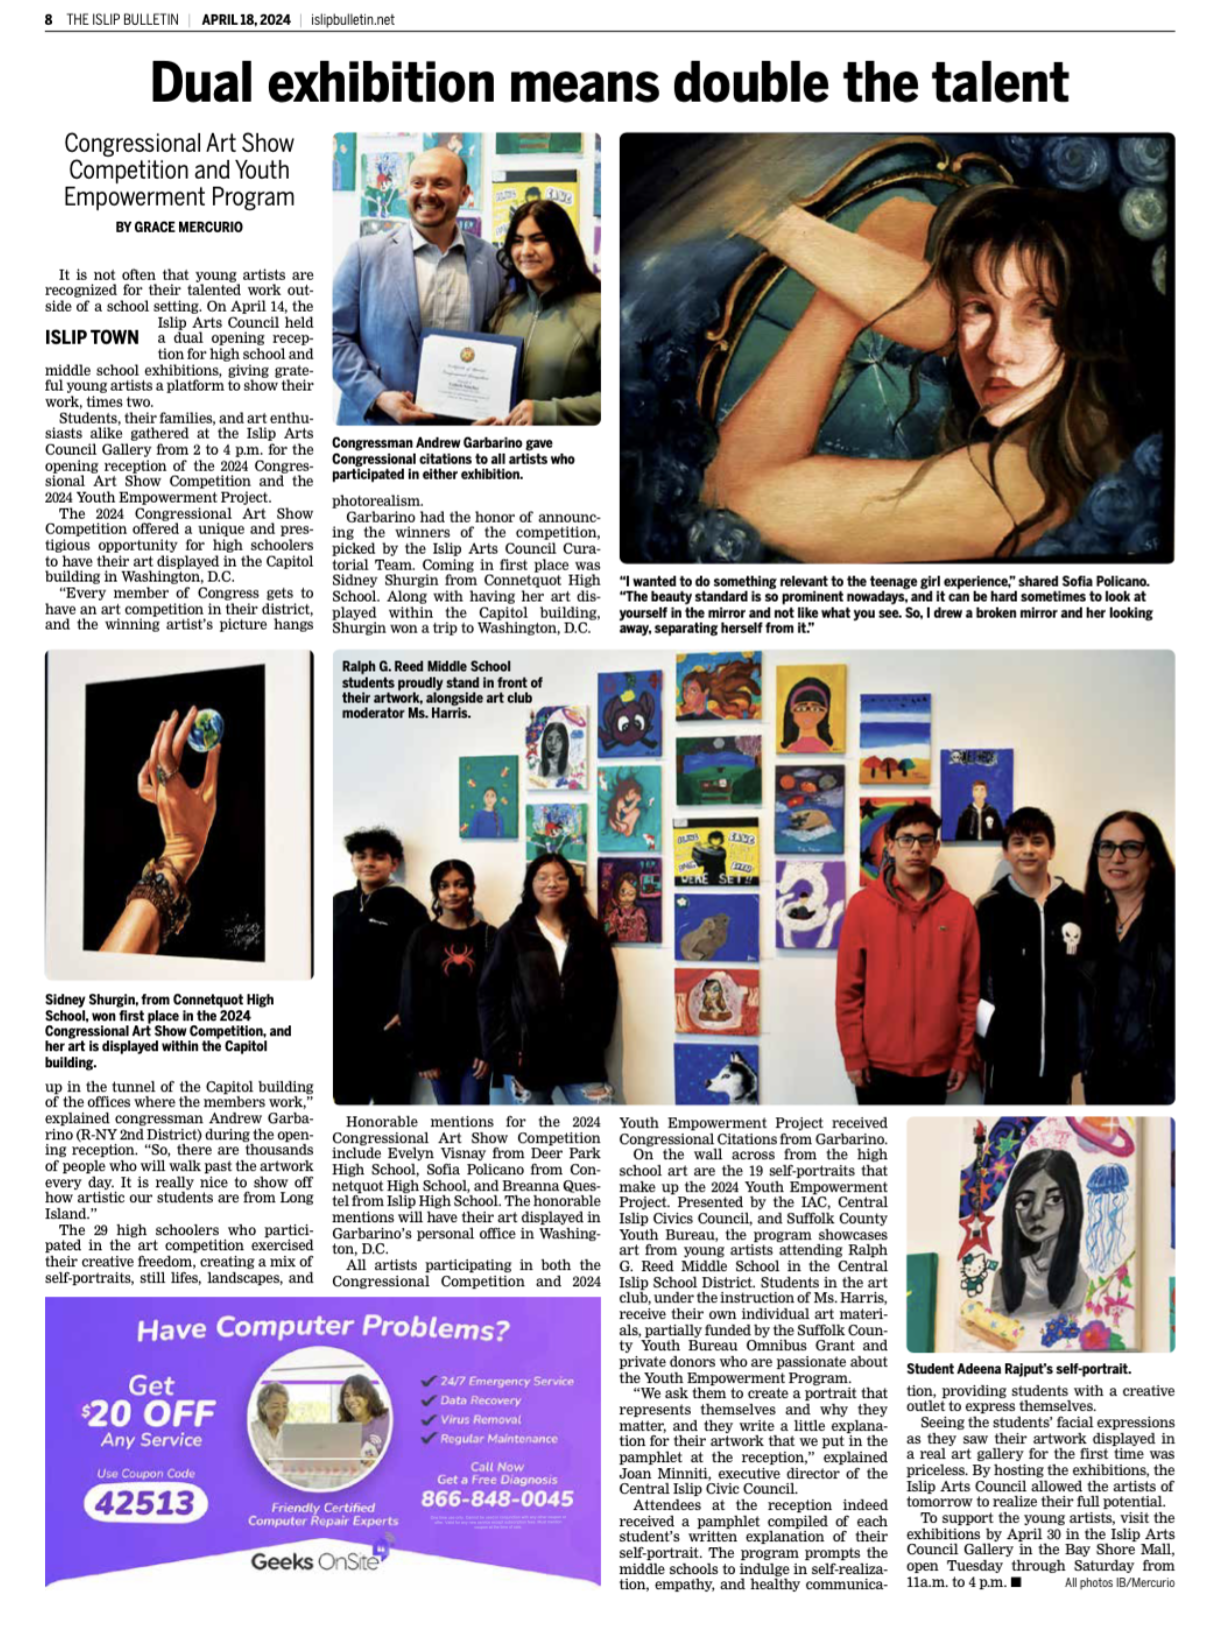 APR 2024 / Congressional Art Competition and Youth Empowerment Show Featured in Islip Bulletin